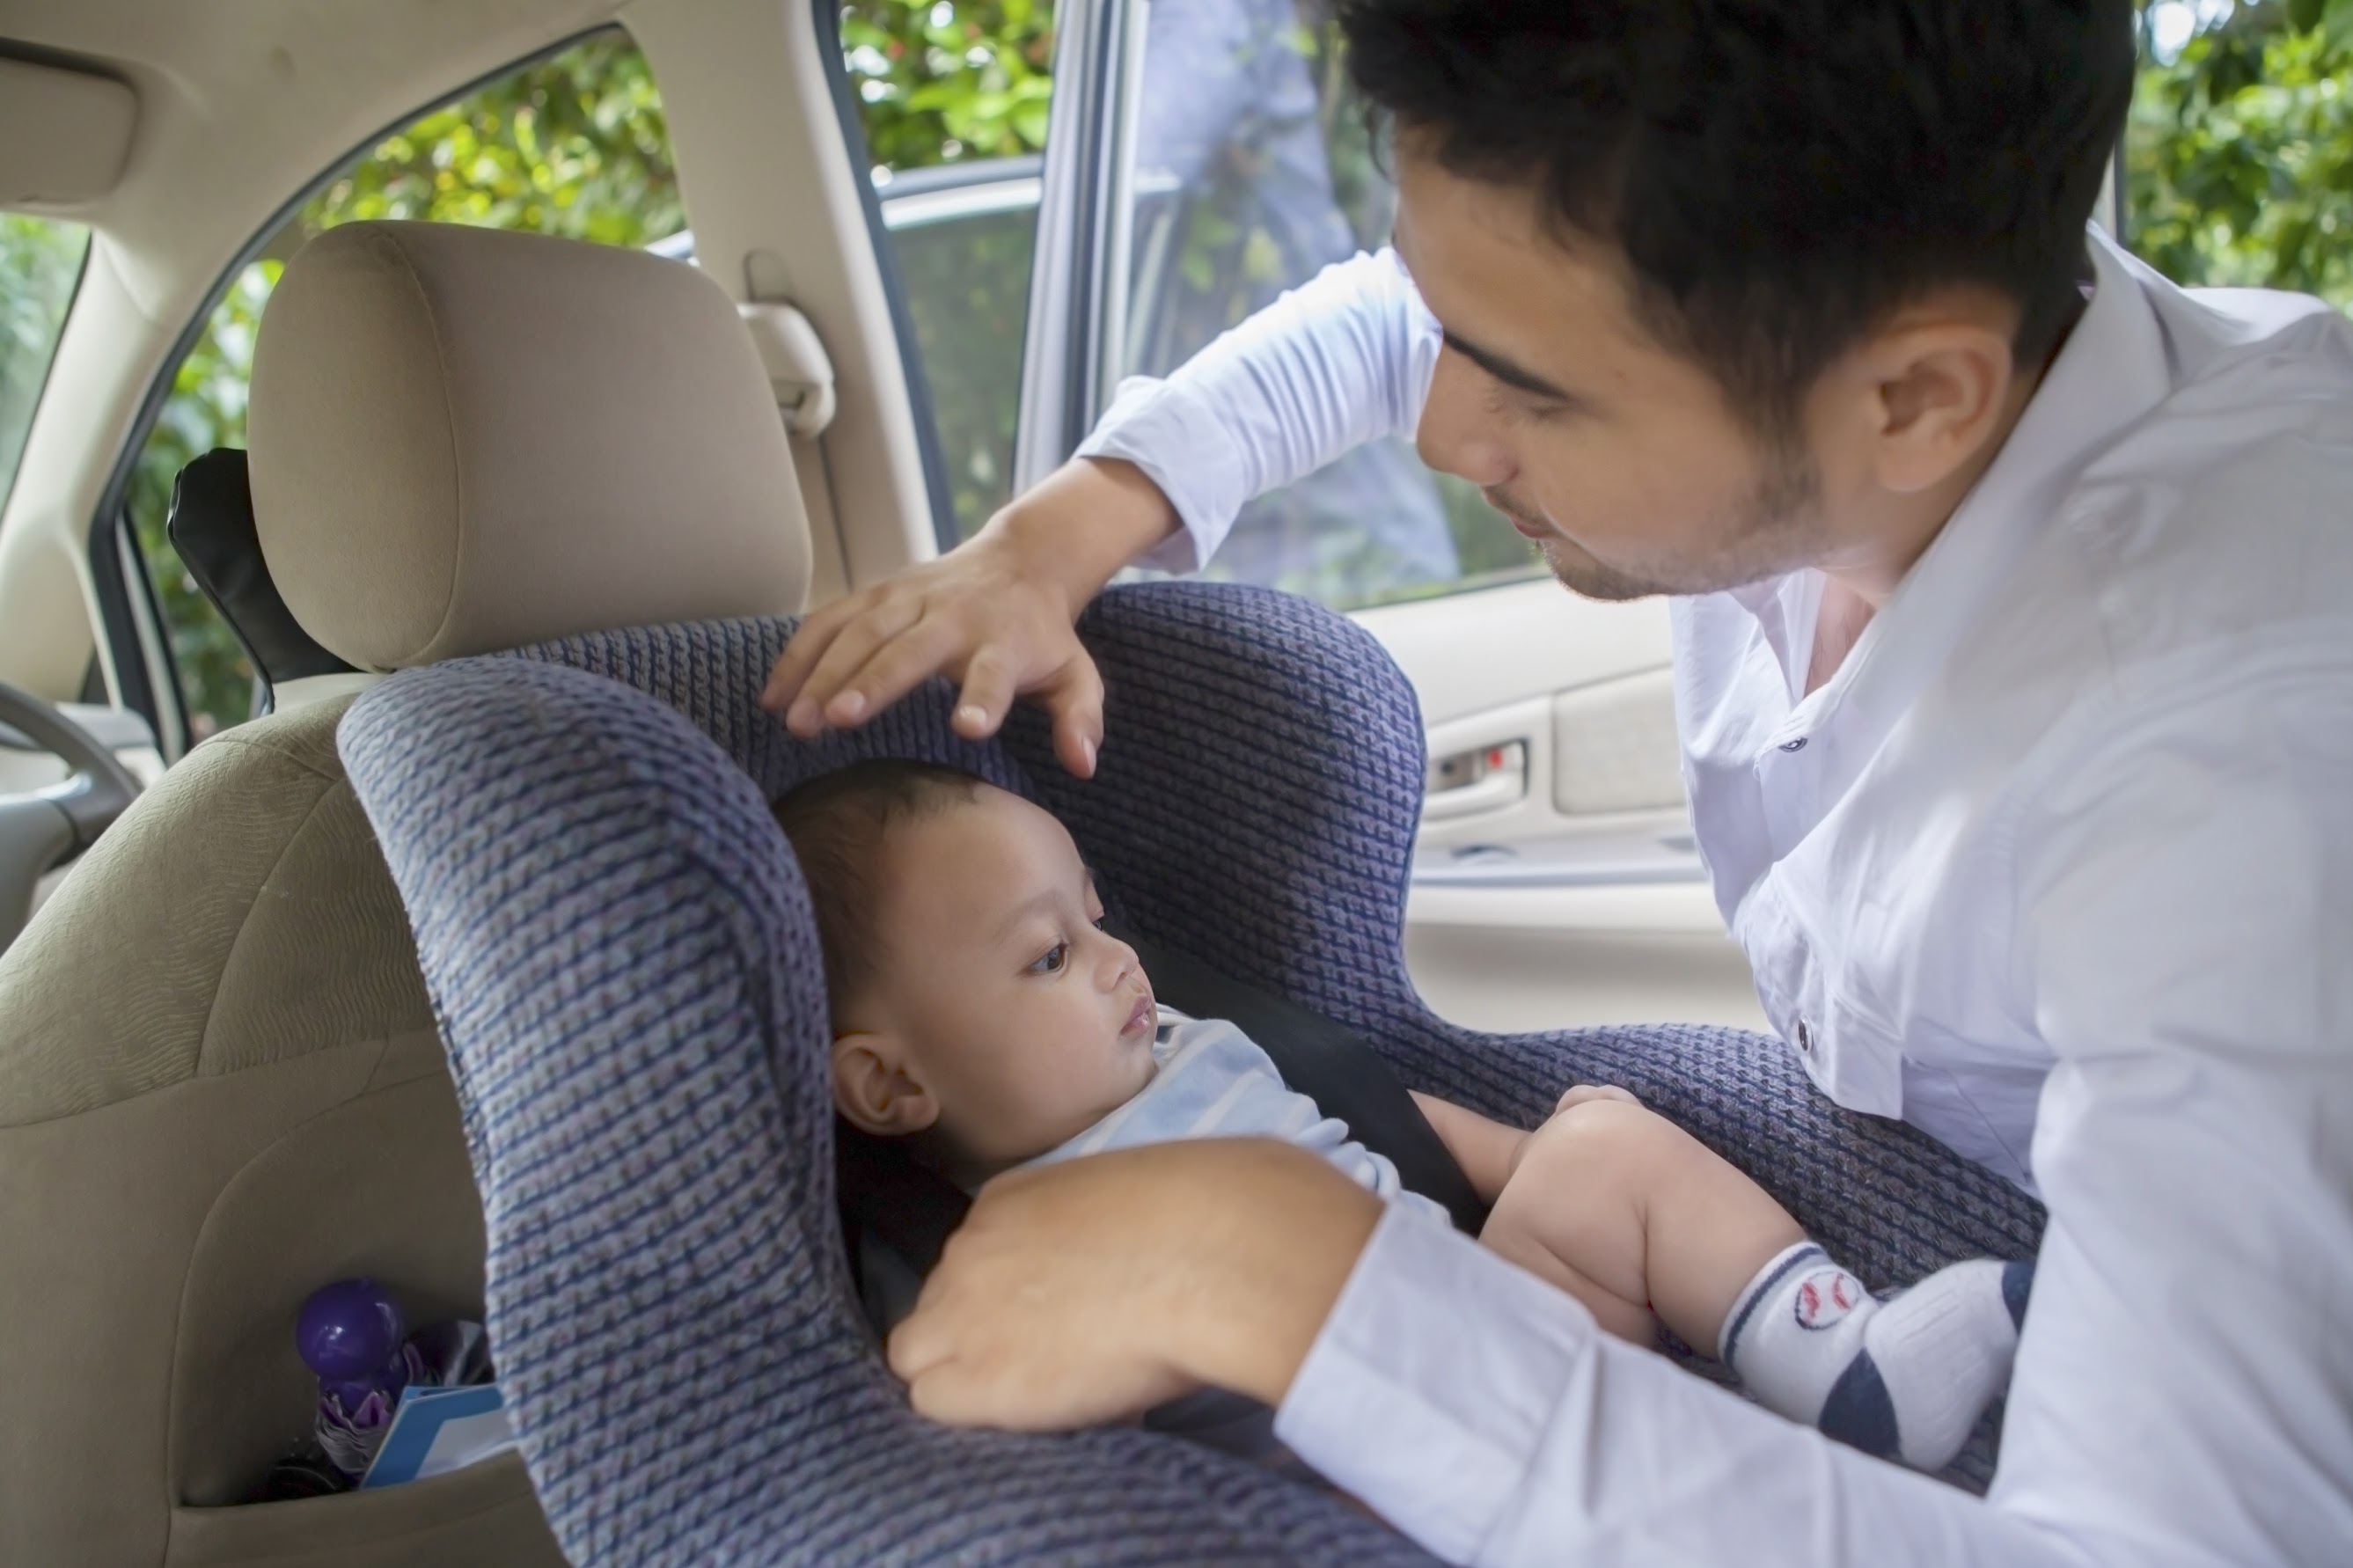 A father strapping in toddler in a child seat in a car